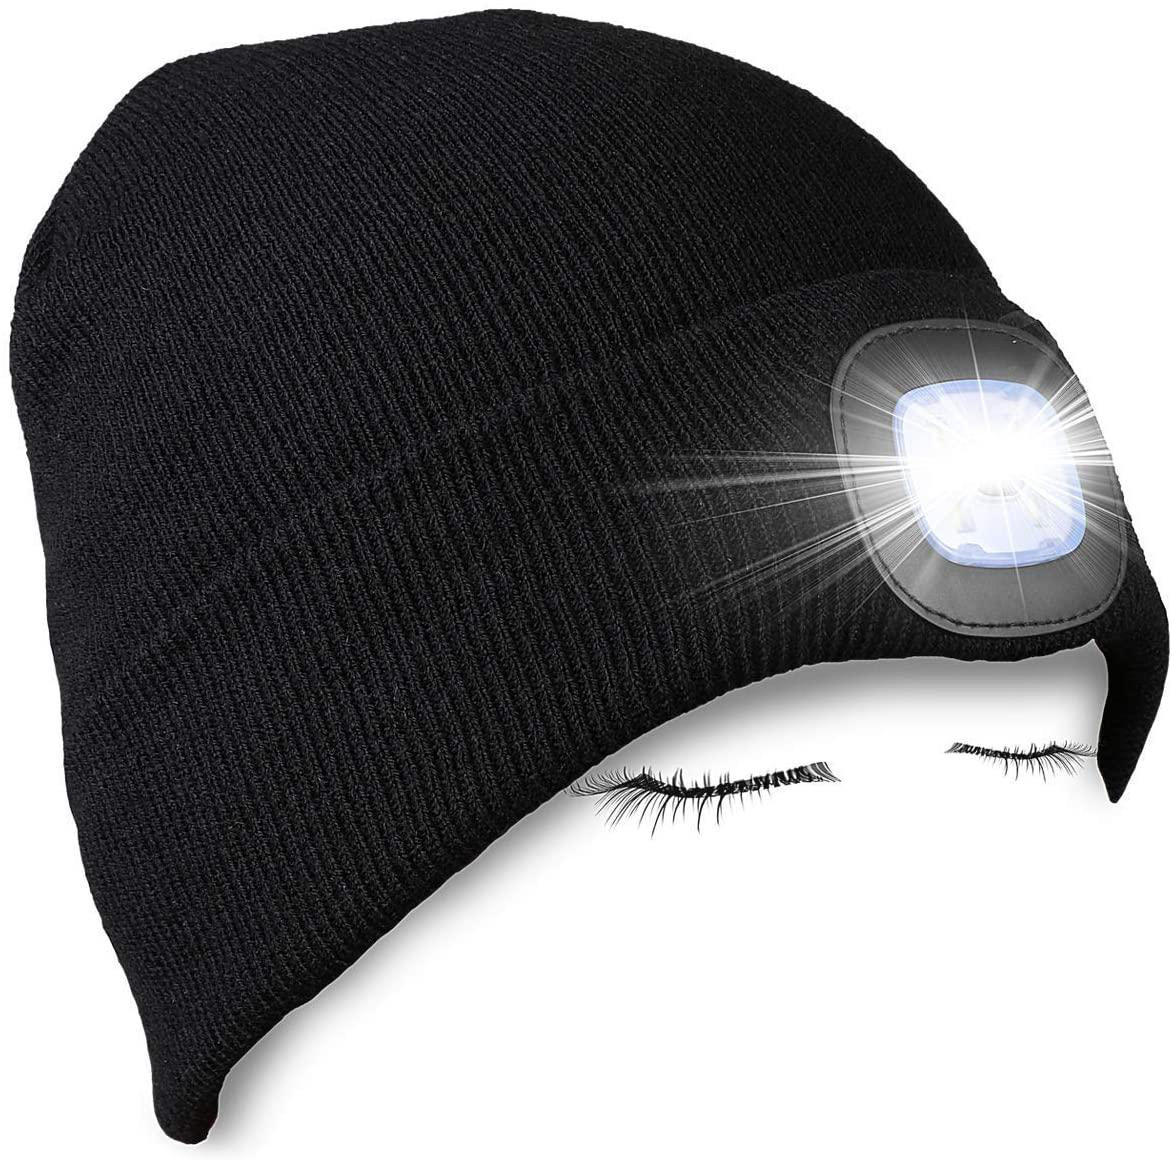 5 LED Beanie Rechargeable Hat Camping Knited Winter Unisex Headlight Cap Black for sale online 